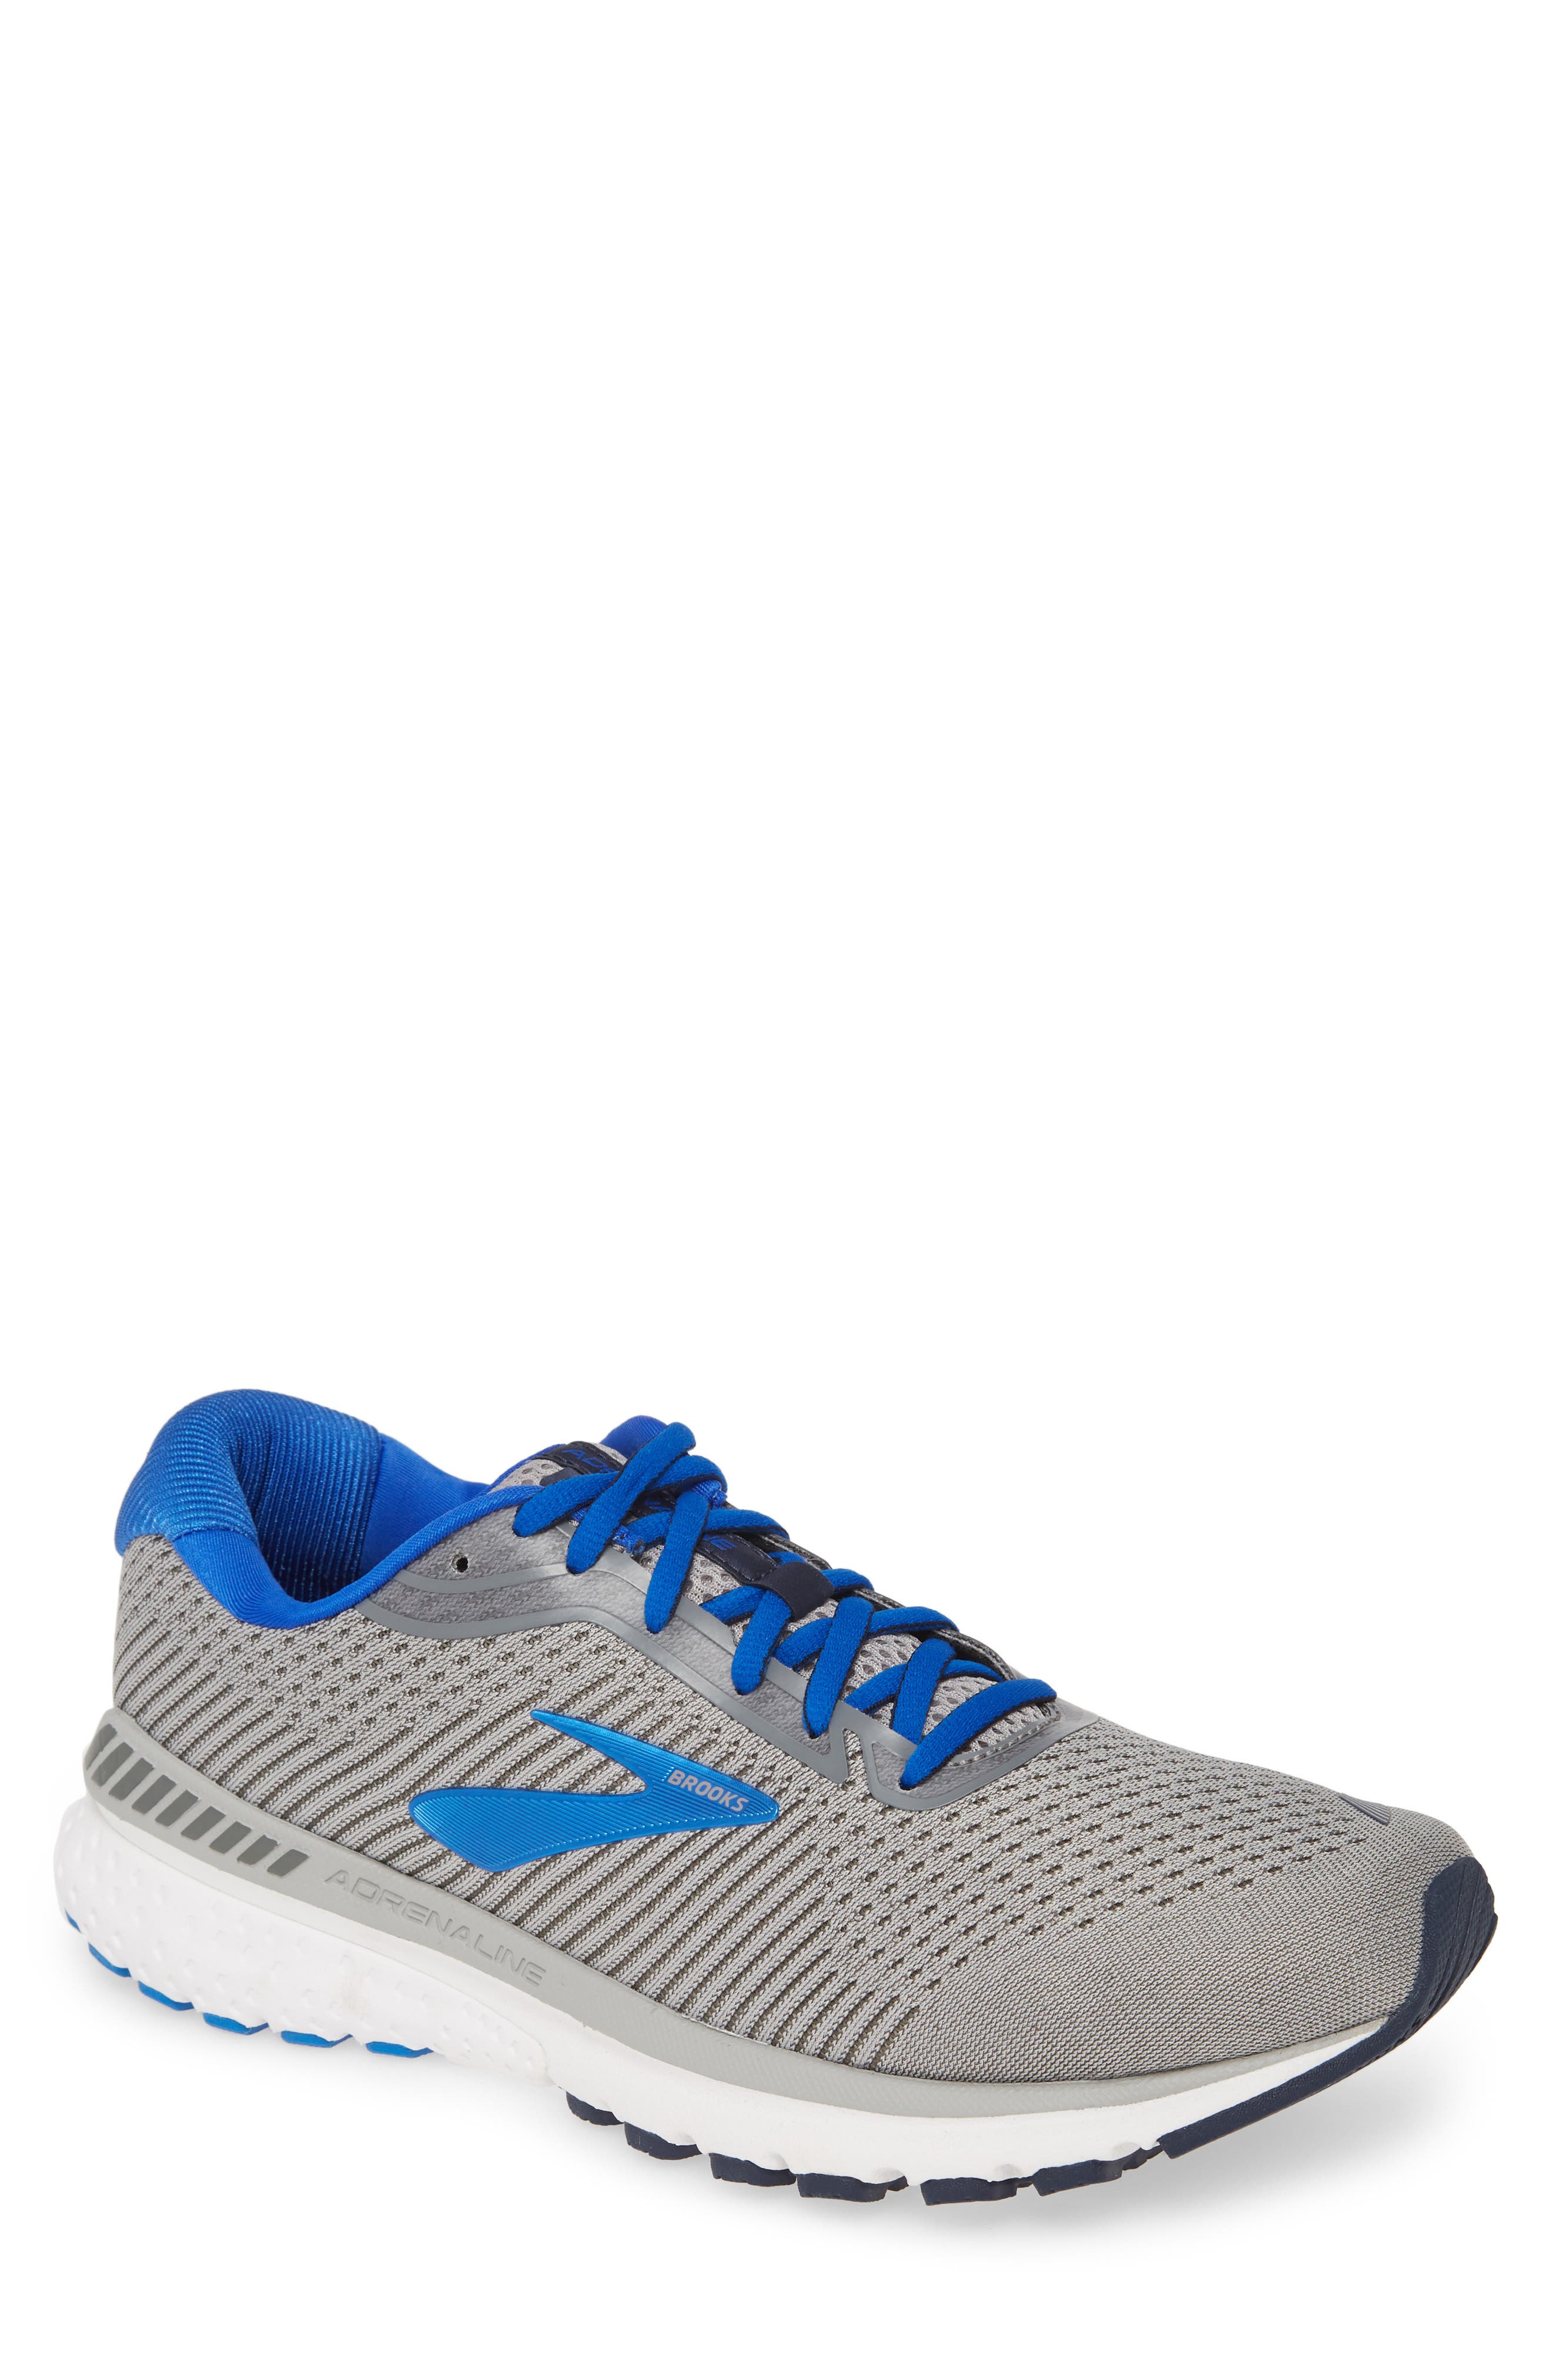 brooks shoes clearance mens